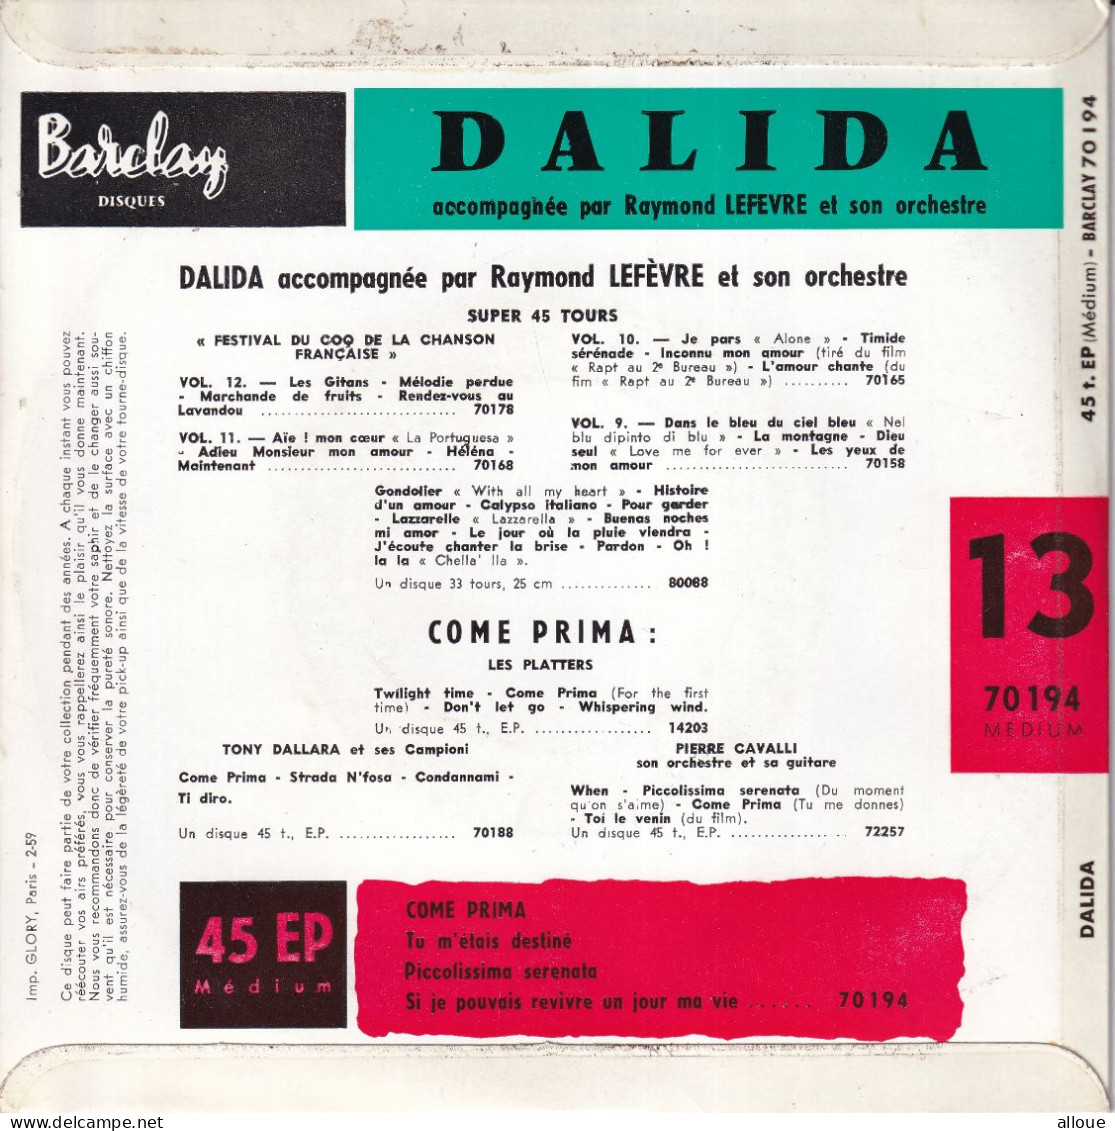 DALIDA - FR EP - COME PRIMA + 3 - Other - French Music